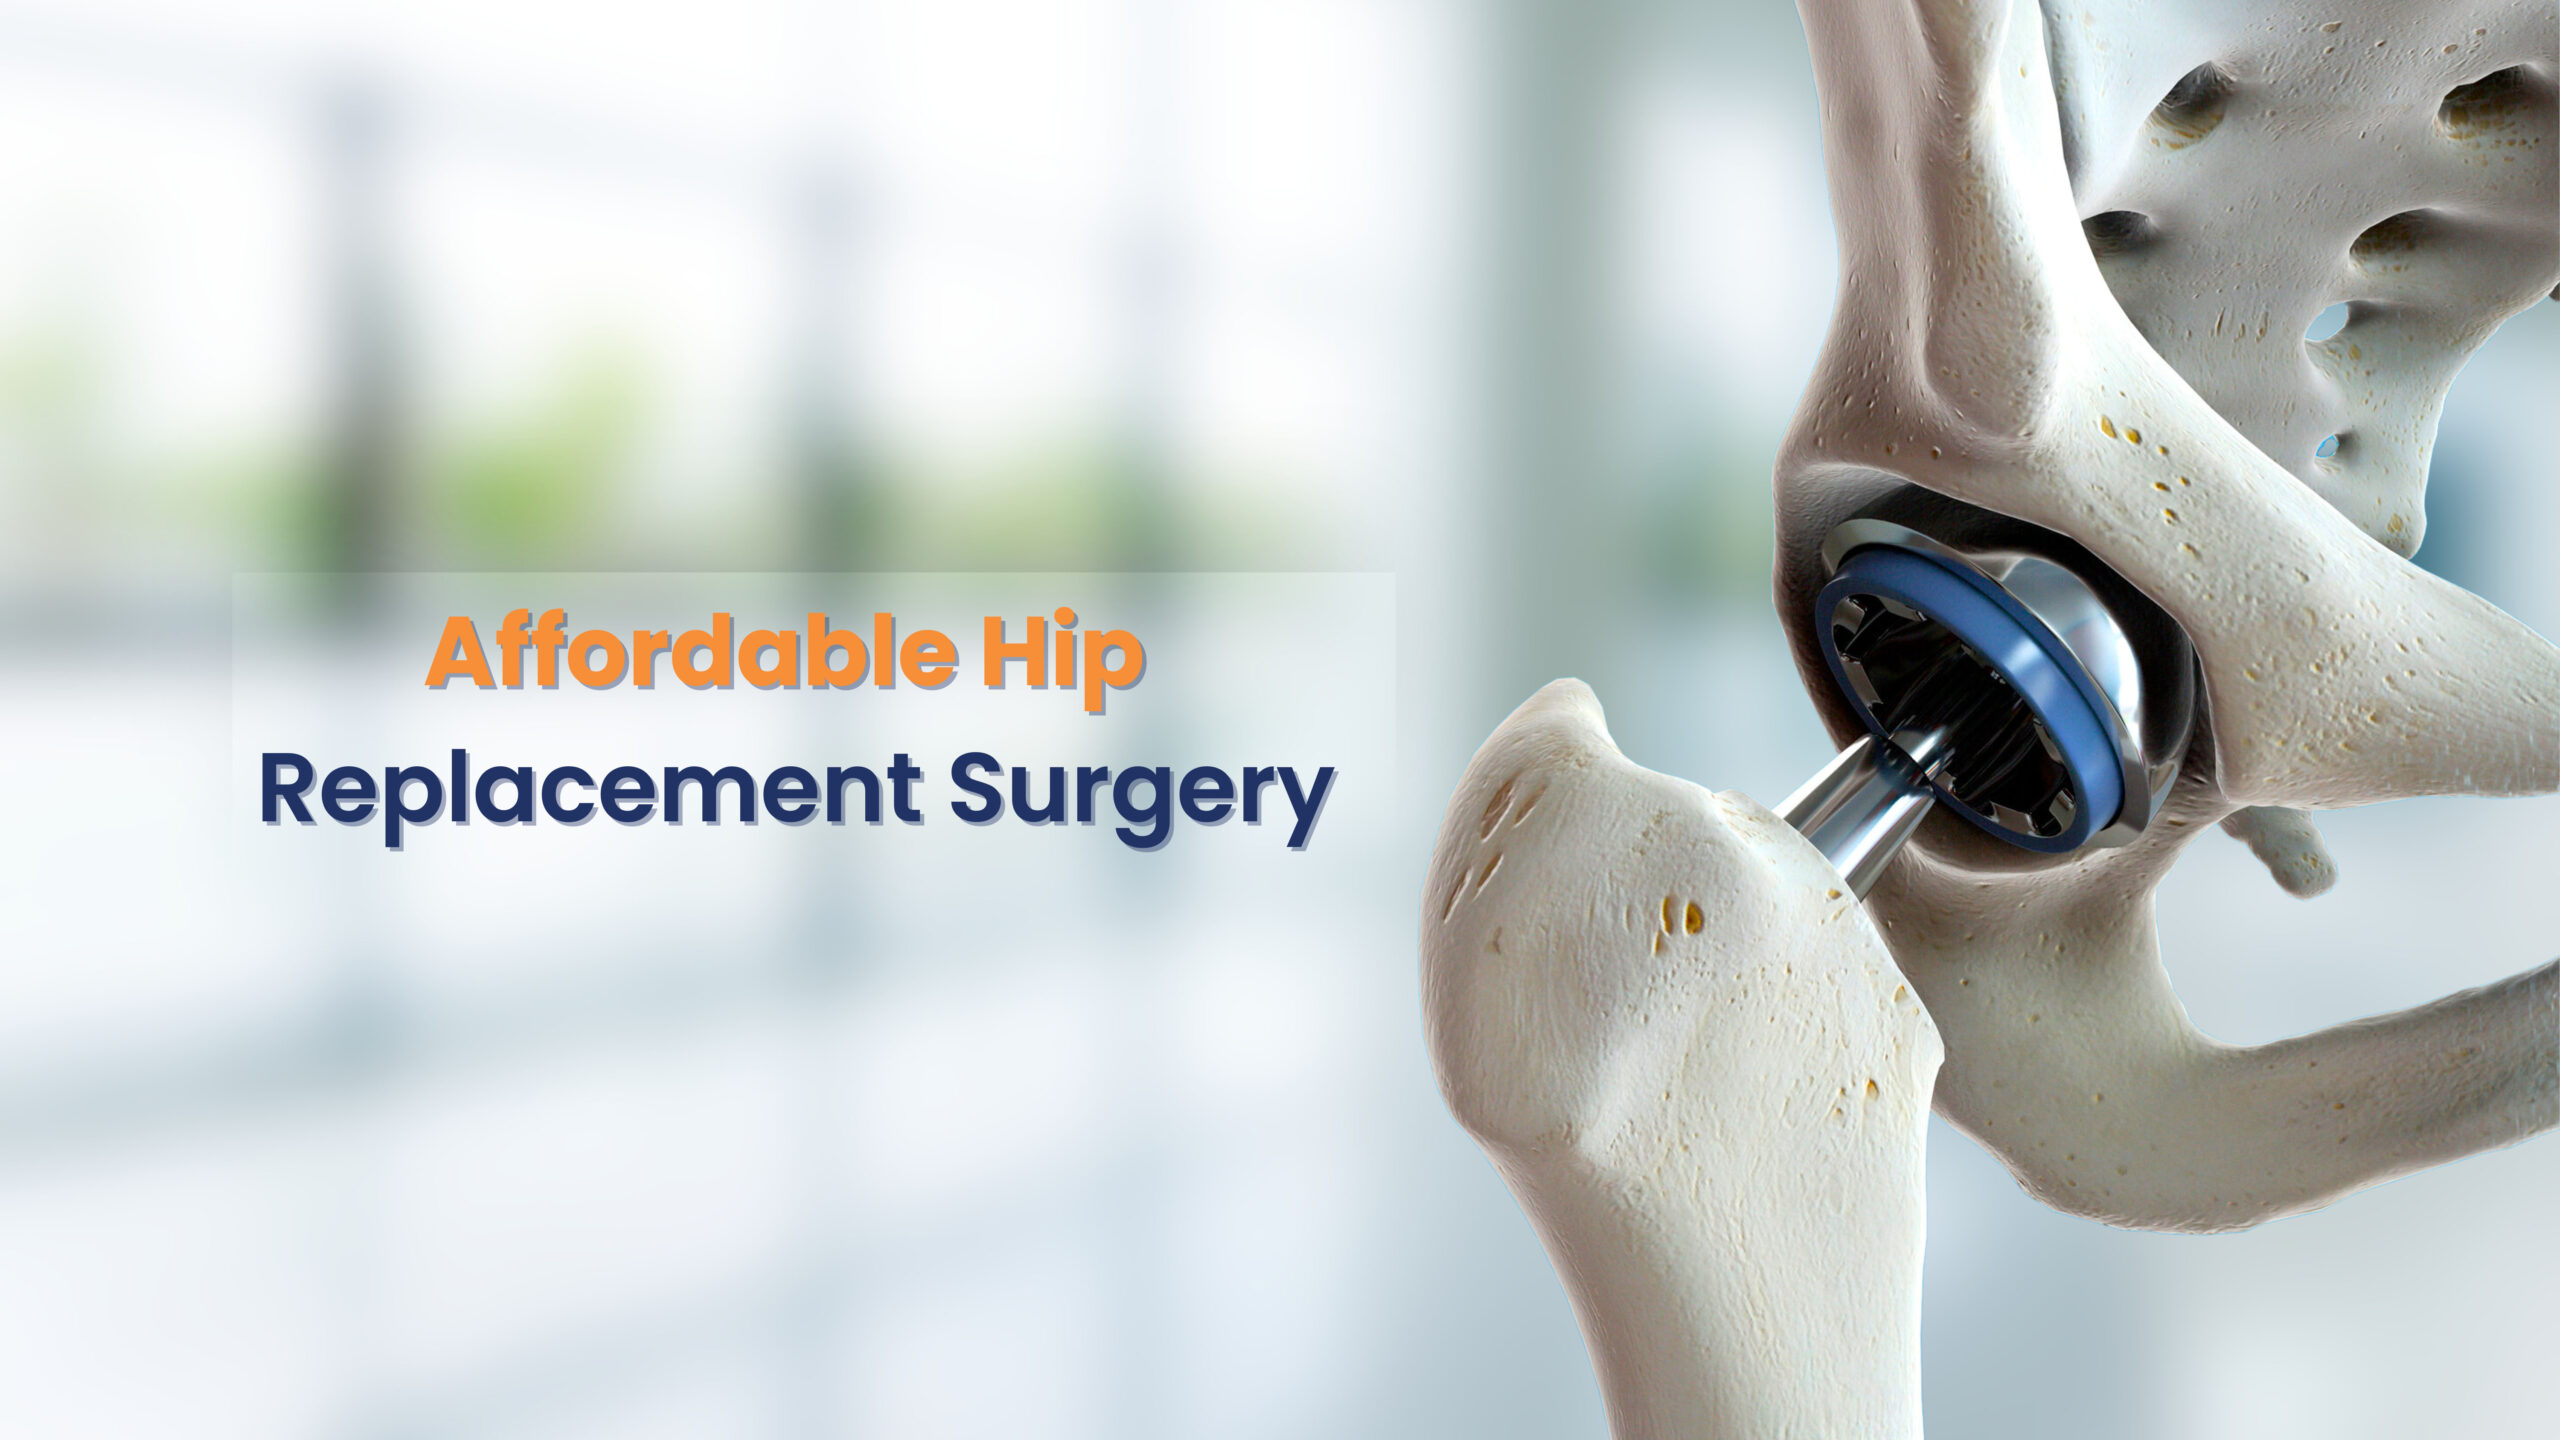 Affordable Hip Replacement Surgery Restoring Mobility And Quality Of